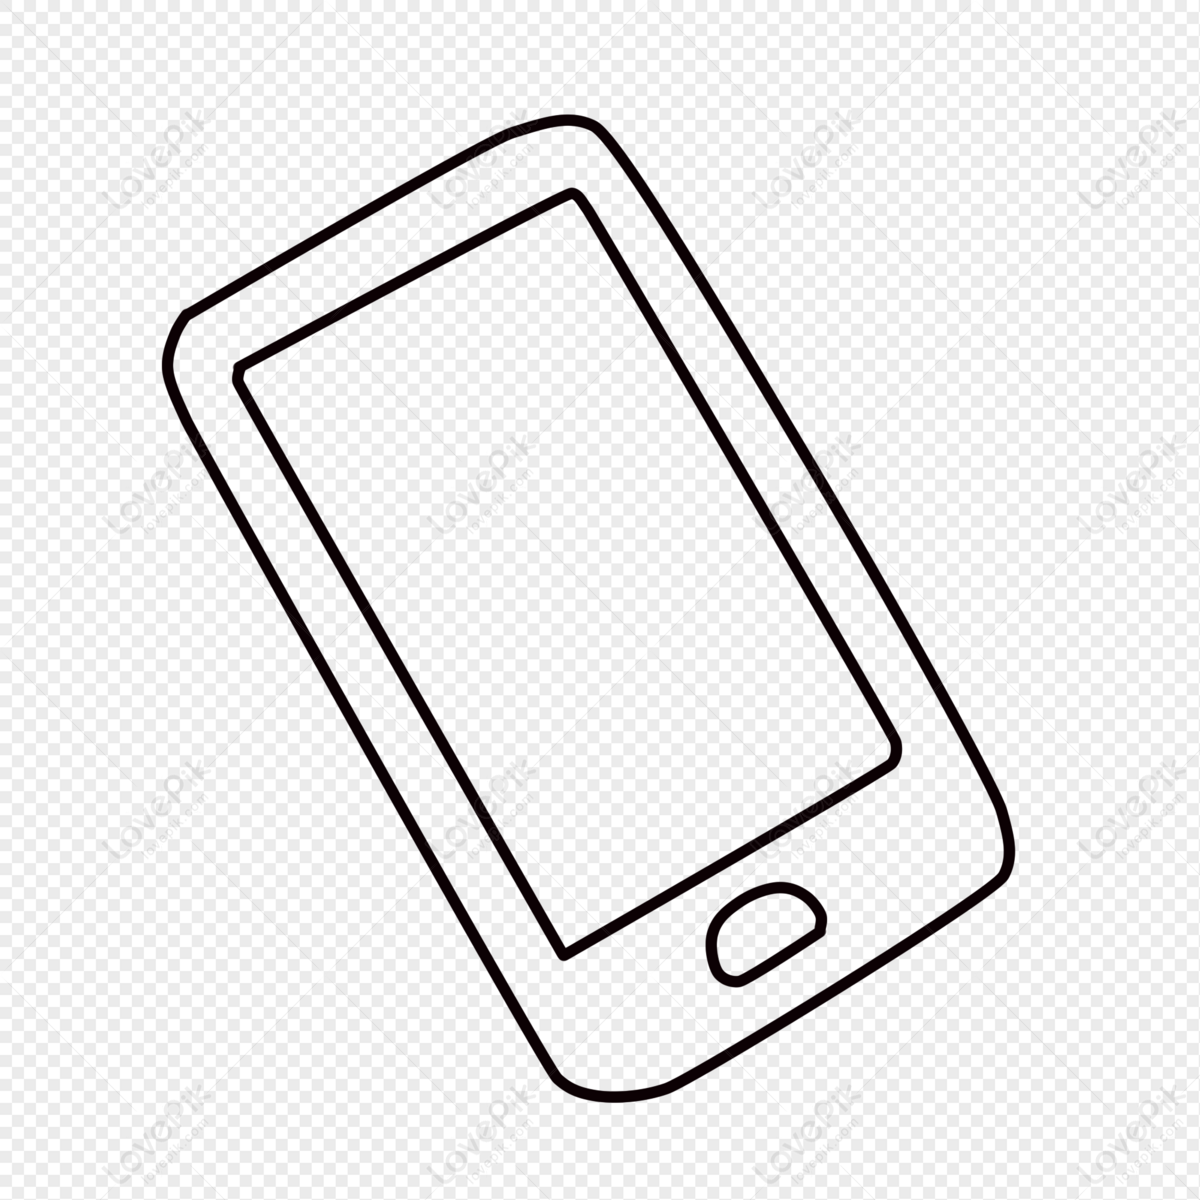 Mobile Phone Icon PNG Hd Transparent Image And Clipart Image For Free  Download - Lovepik | 401368264